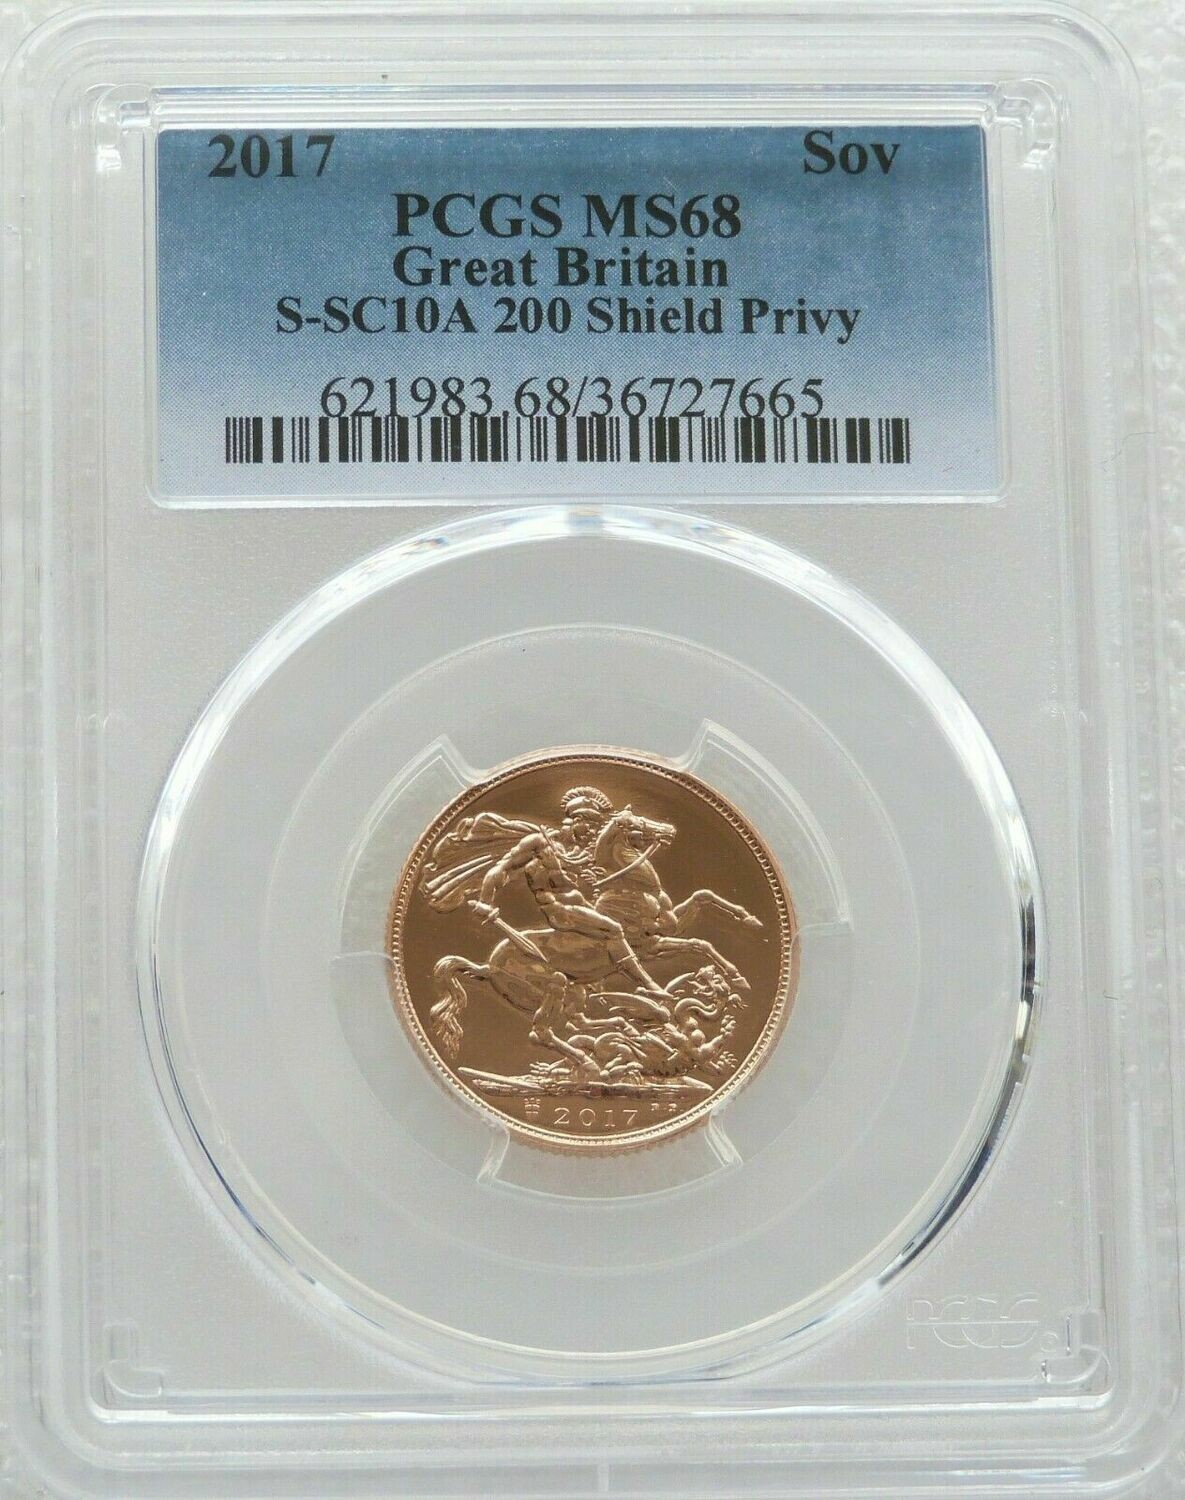 2017 Pistrucci Full Sovereign Gold Coin PCGS MS68